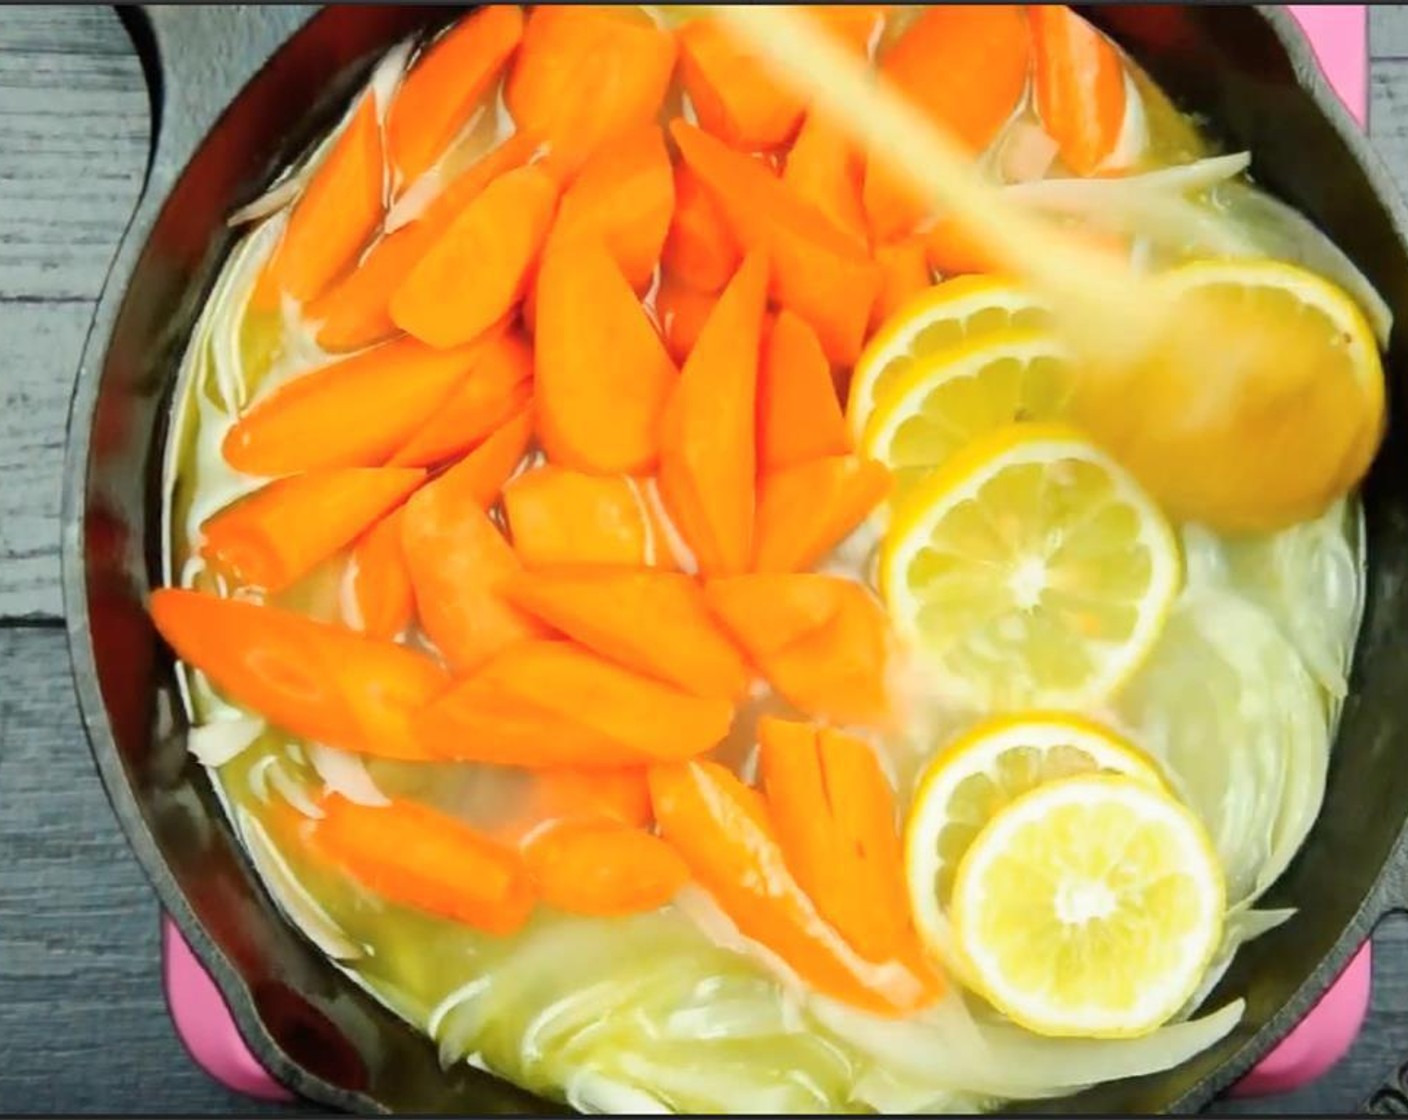 step 5 Stir in White Wine (1/2 cup) and cook until evaporates, about 3-4 minutes. Add Chicken Broth (1 cup) Carrots (6), Lemon (1). Stir well and place the seasoned chicken on top.